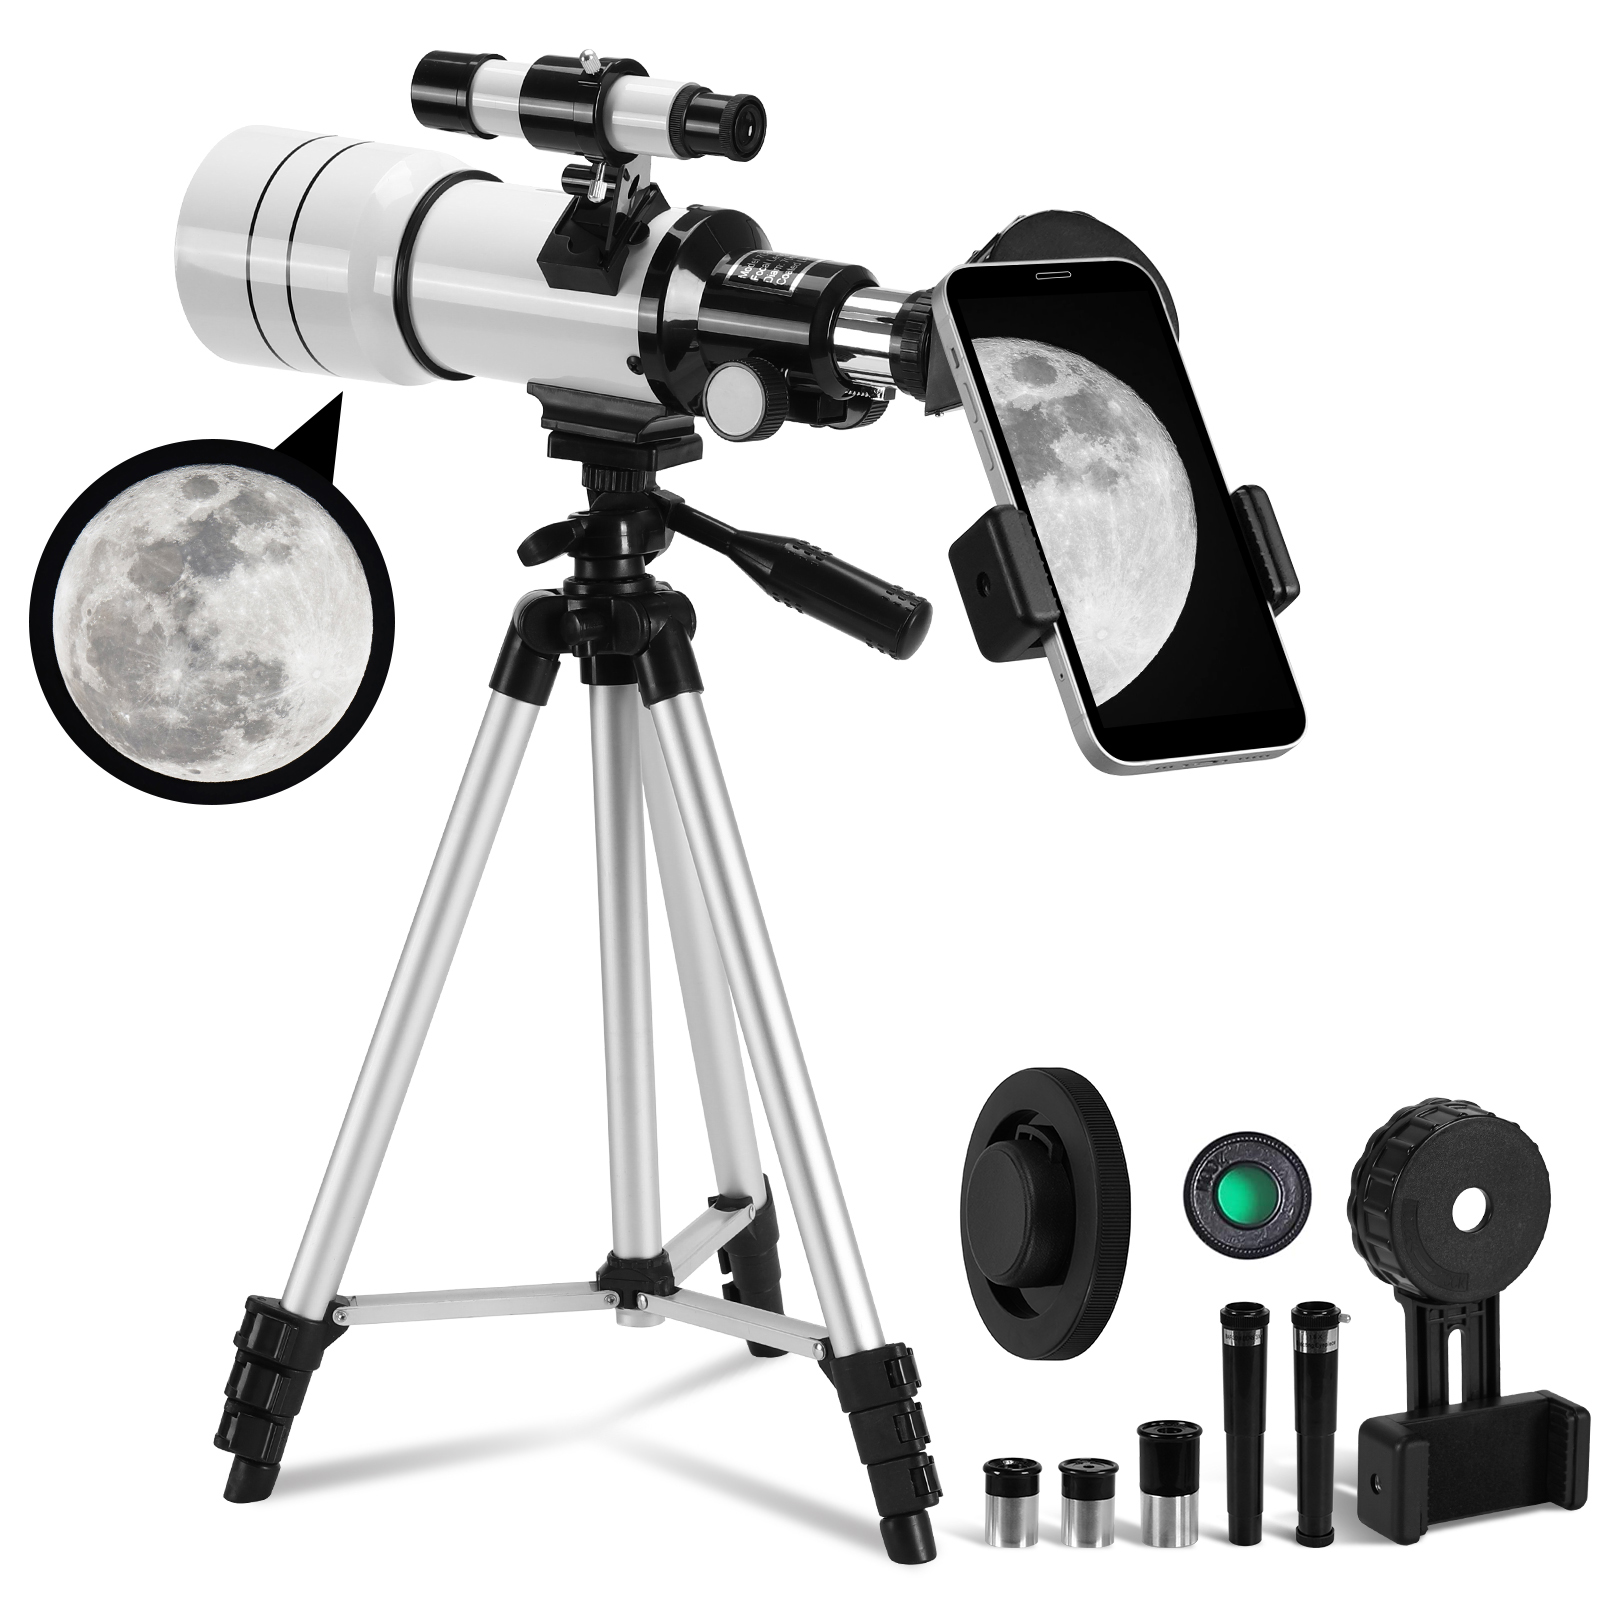 TOPVISION Telescope, 70mm Telescopes for Adults & Kids, 300mm Portable Refractor Telescope (15X-150X) with a Phone Adapter & Adjustable Tripod for Astronomy Beginners, Gift for Kids - image 1 of 10